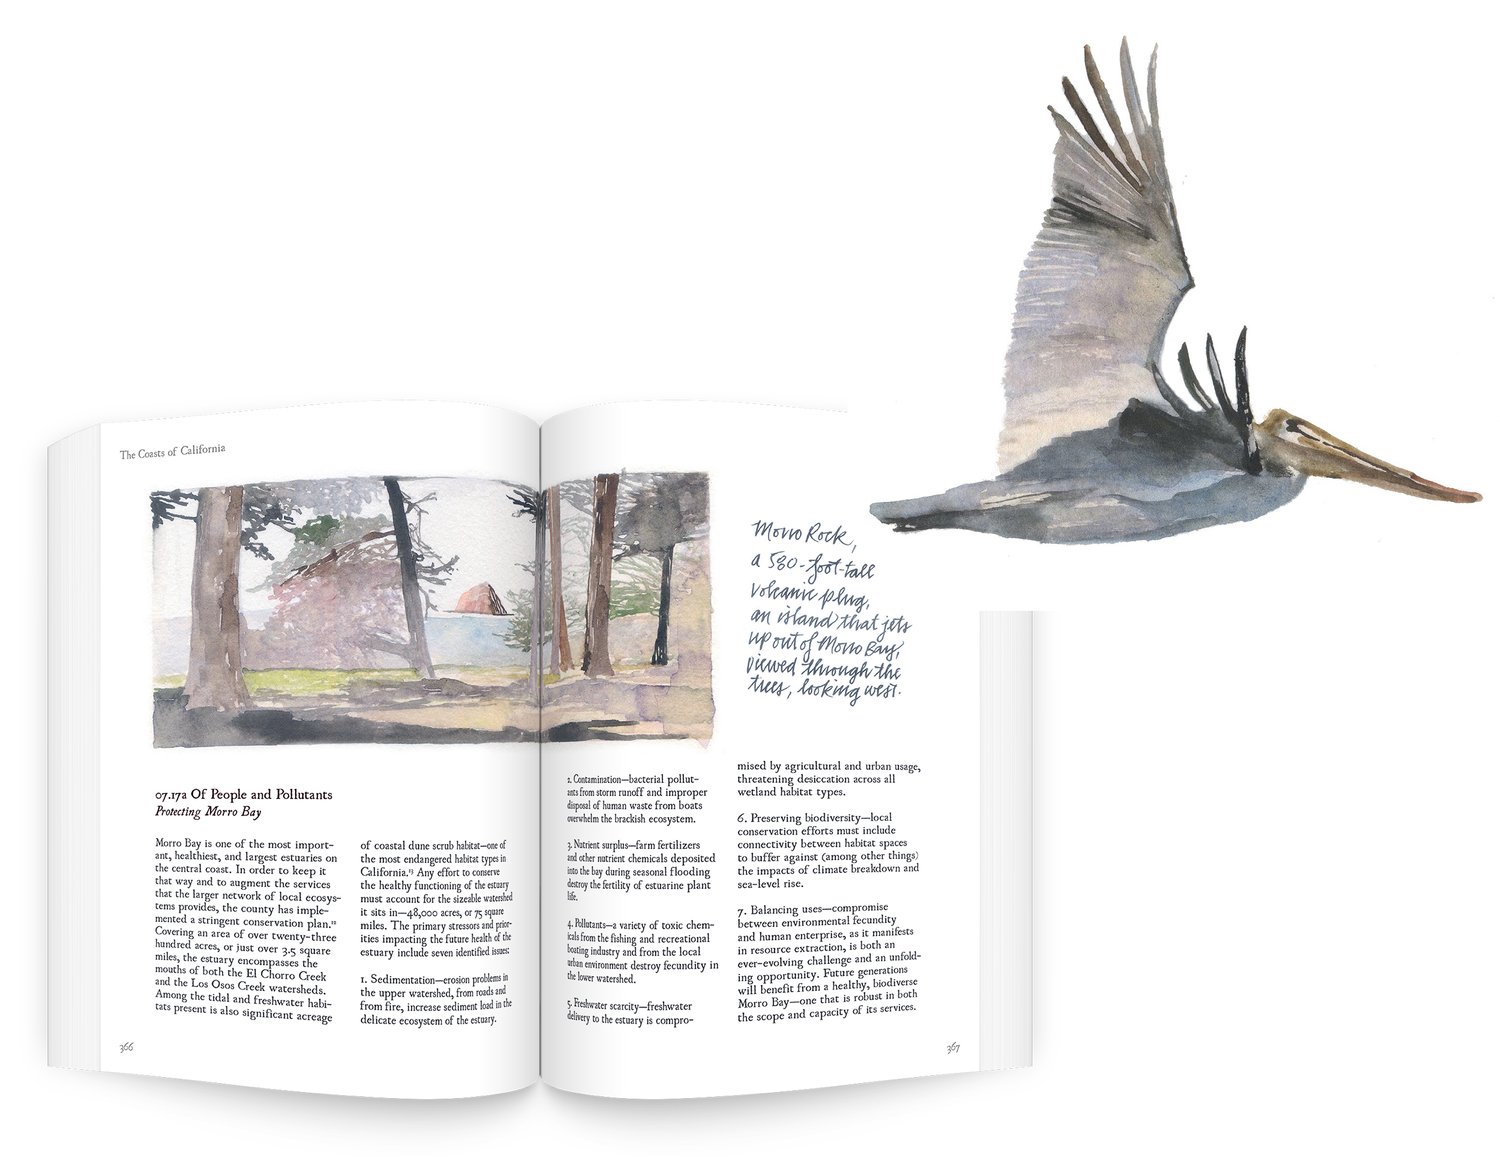 Open pages of his book with a closeup of a painting of a bird.